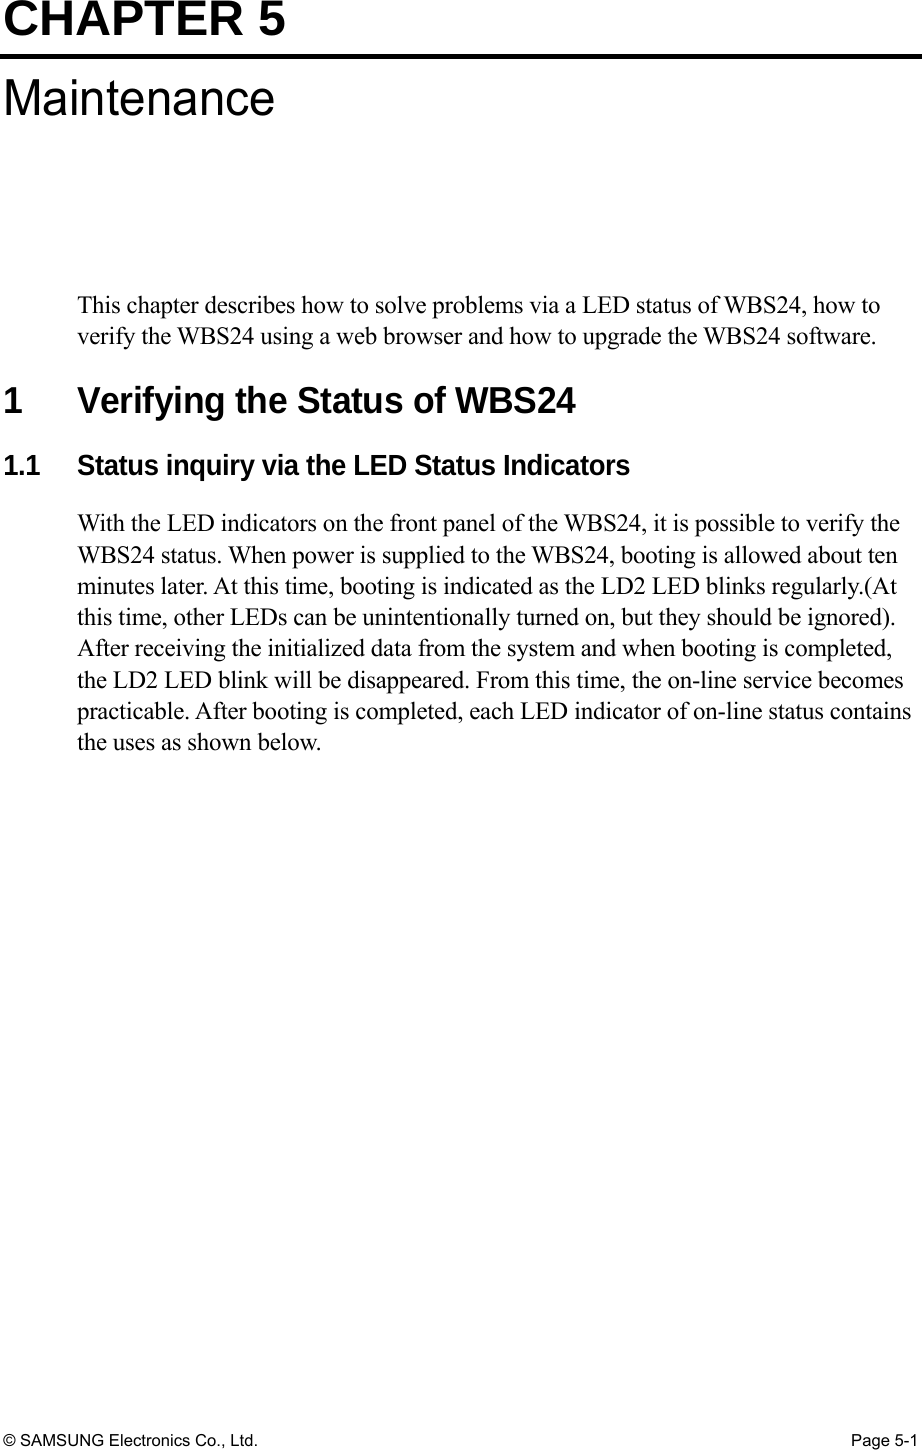 CHAPTER 5 © SAMSUNG Electronics Co., Ltd.  Page 5-1 Maintenance This chapter describes how to solve problems via a LED status of WBS24, how to verify the WBS24 using a web browser and how to upgrade the WBS24 software.  1  Verifying the Status of WBS24 1.1    Status inquiry via the LED Status Indicators With the LED indicators on the front panel of the WBS24, it is possible to verify the WBS24 status. When power is supplied to the WBS24, booting is allowed about ten minutes later. At this time, booting is indicated as the LD2 LED blinks regularly.(At this time, other LEDs can be unintentionally turned on, but they should be ignored). After receiving the initialized data from the system and when booting is completed, the LD2 LED blink will be disappeared. From this time, the on-line service becomes practicable. After booting is completed, each LED indicator of on-line status contains the uses as shown below.         